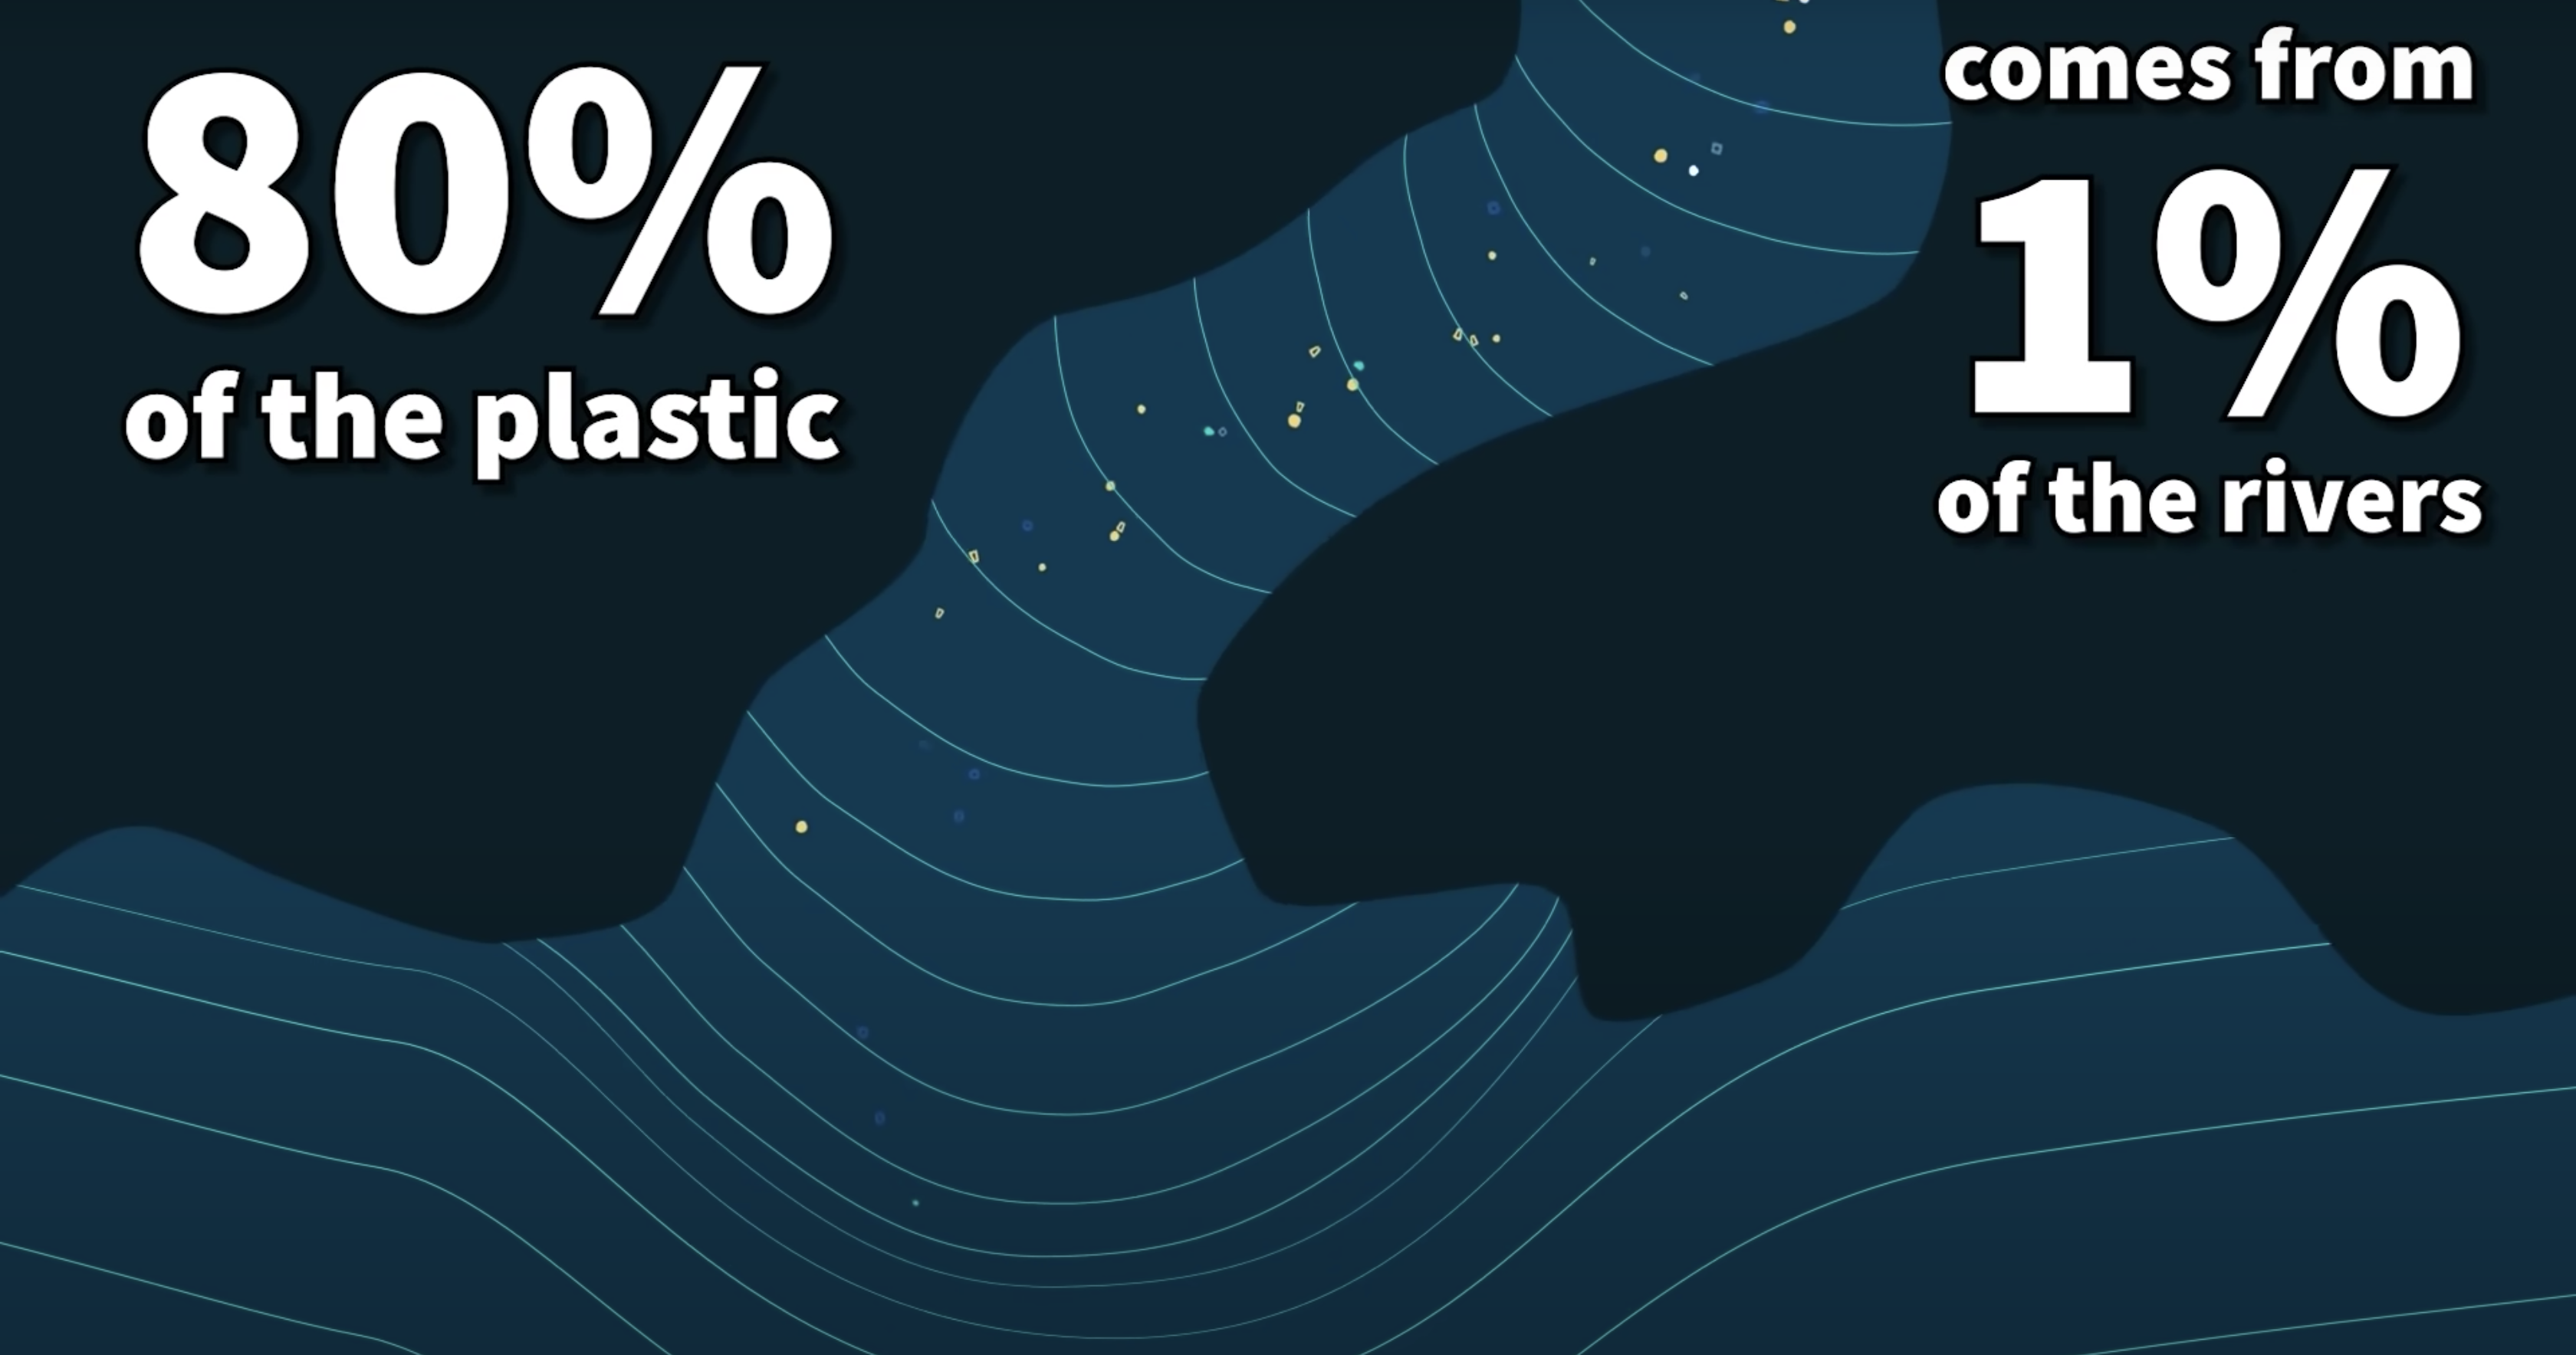 80% of plastic comes from 1% of rivers graphic from Mark Rober